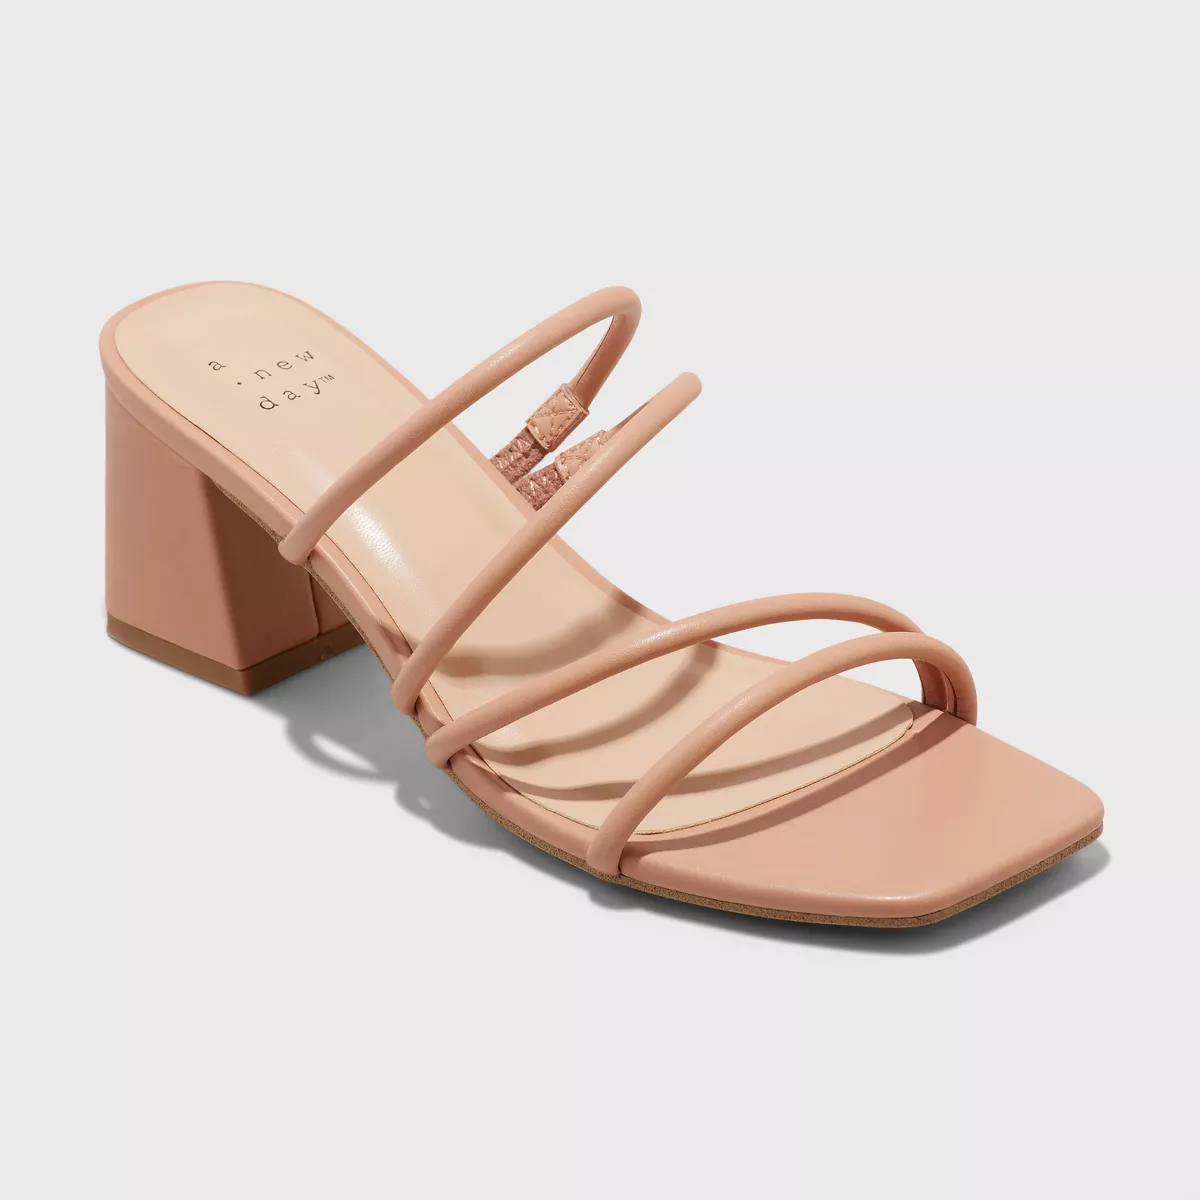 Strappy heeled sandal with a block heel on a solid background